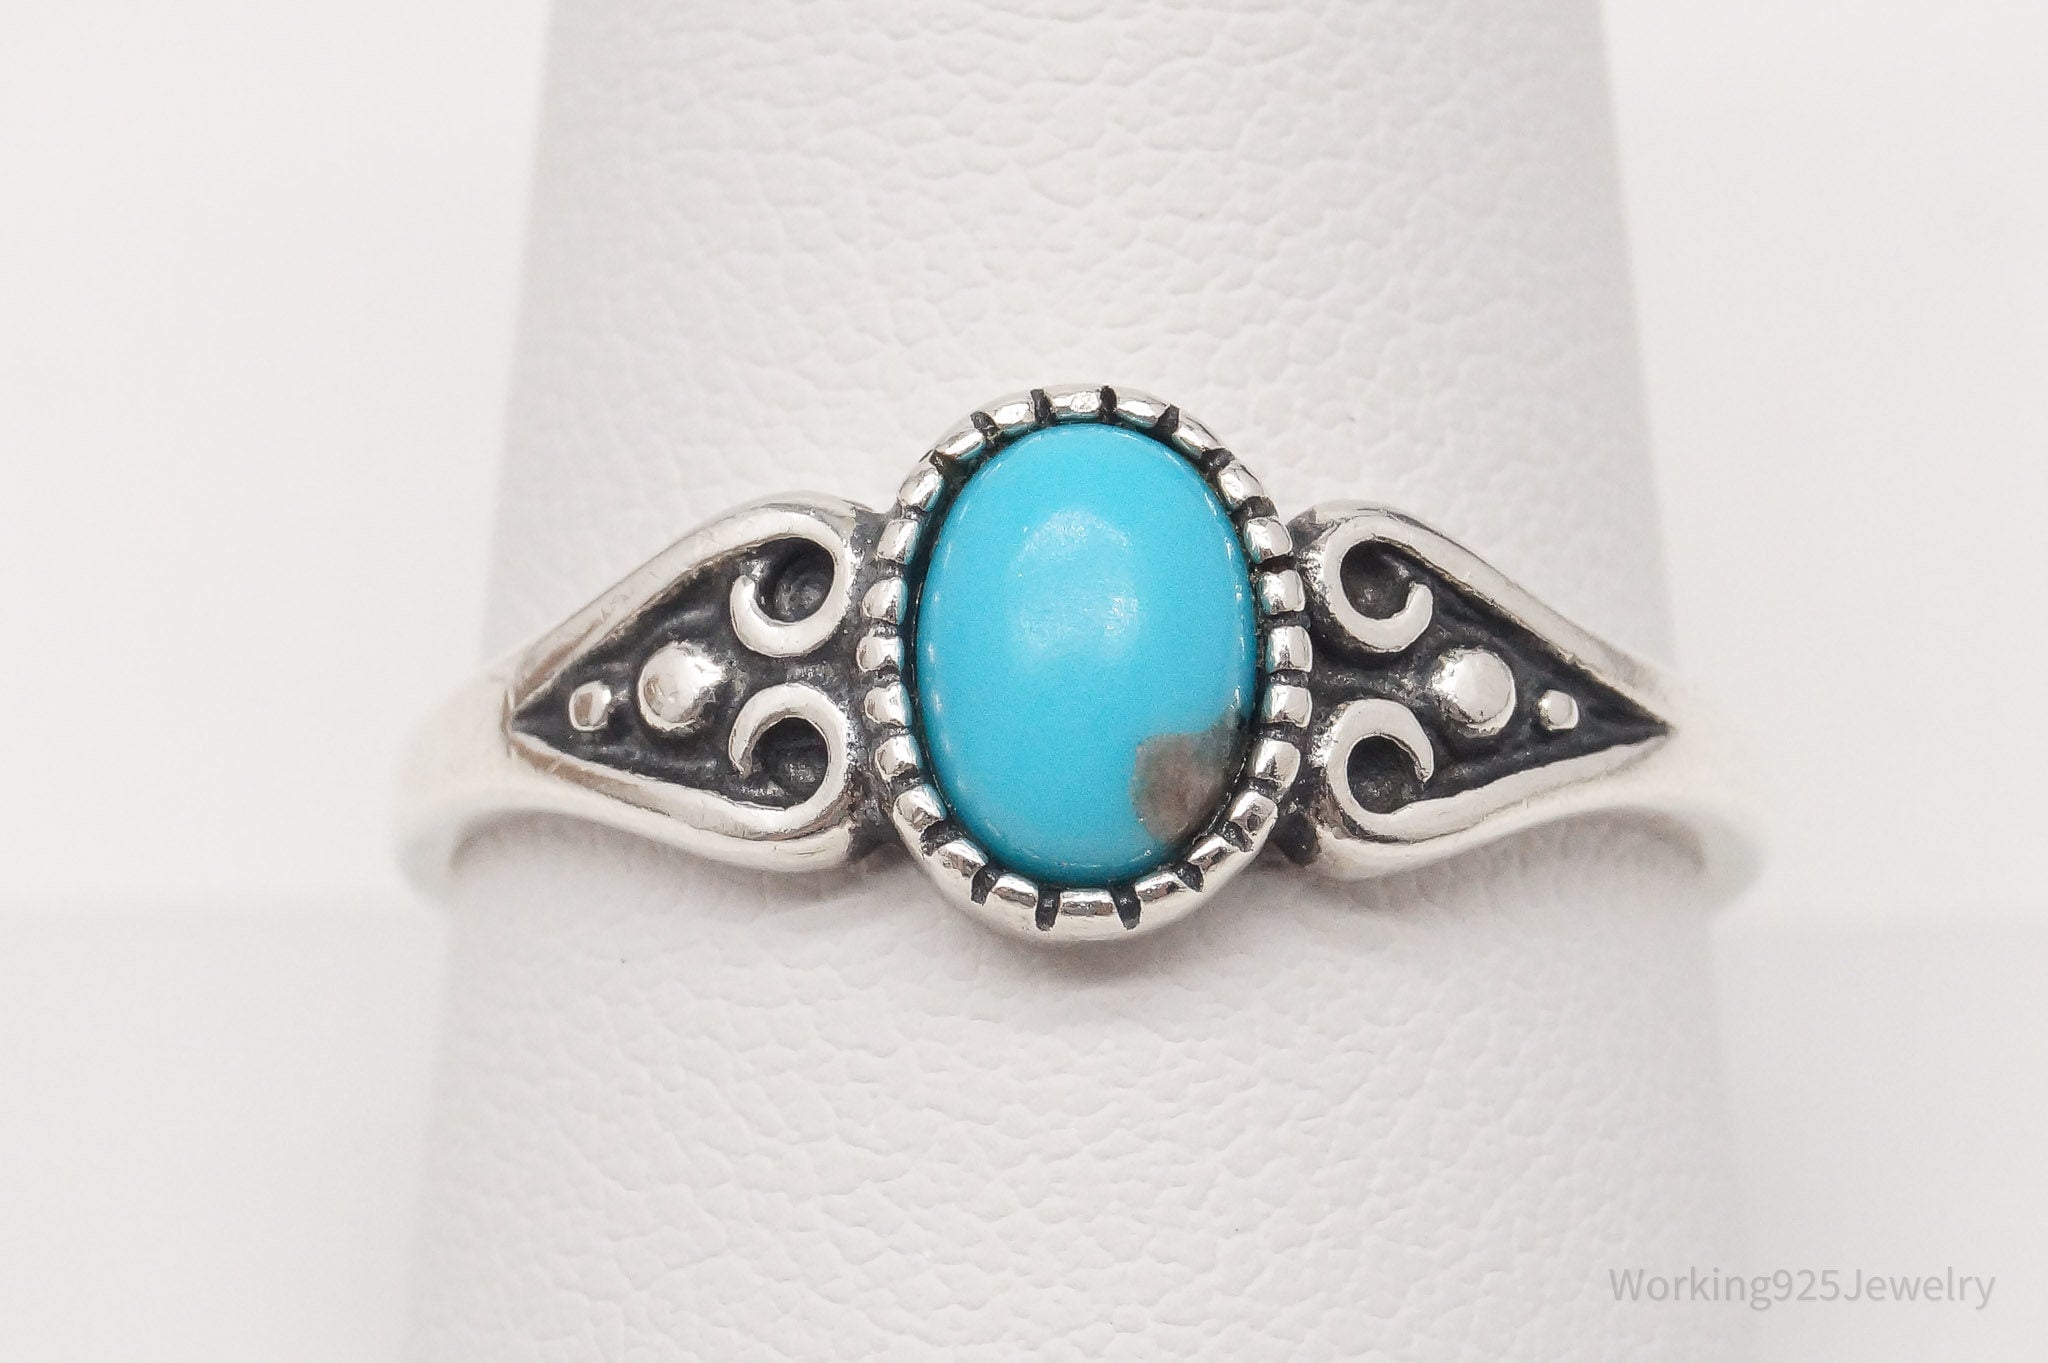 Vintage WMCO Turquoise Sterling Silver Ring - Size 10.25